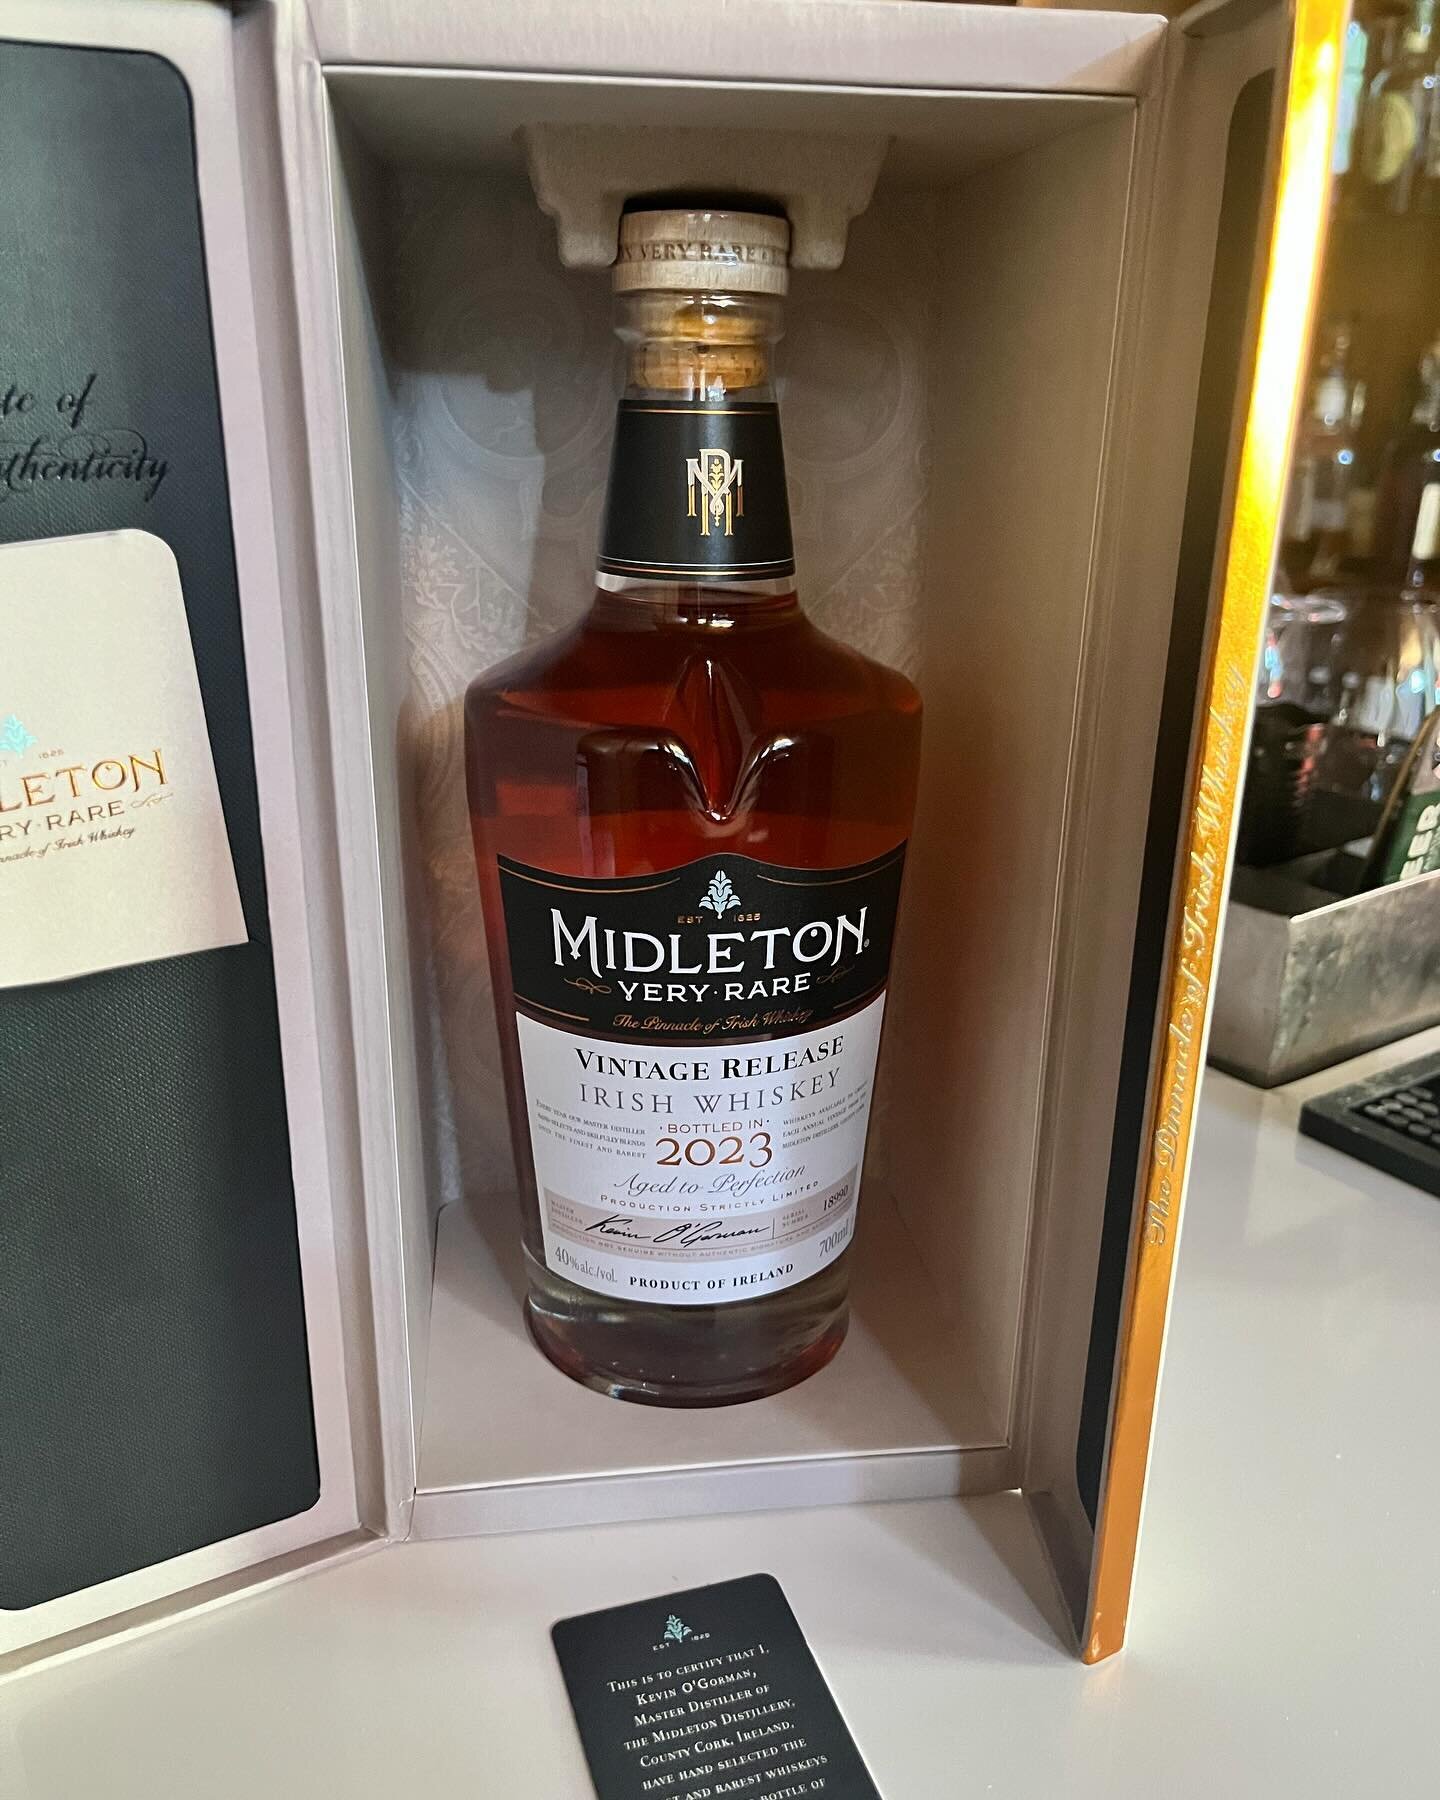 X is proud to add Midleton Very Rare Irish Whiskey its list of fine spirits!

&ldquo;The idea behind Midleton Very Rare is that each expression has its own character&hellip; The 2023 edition is one for those who like older, more mature whiskeys. It a